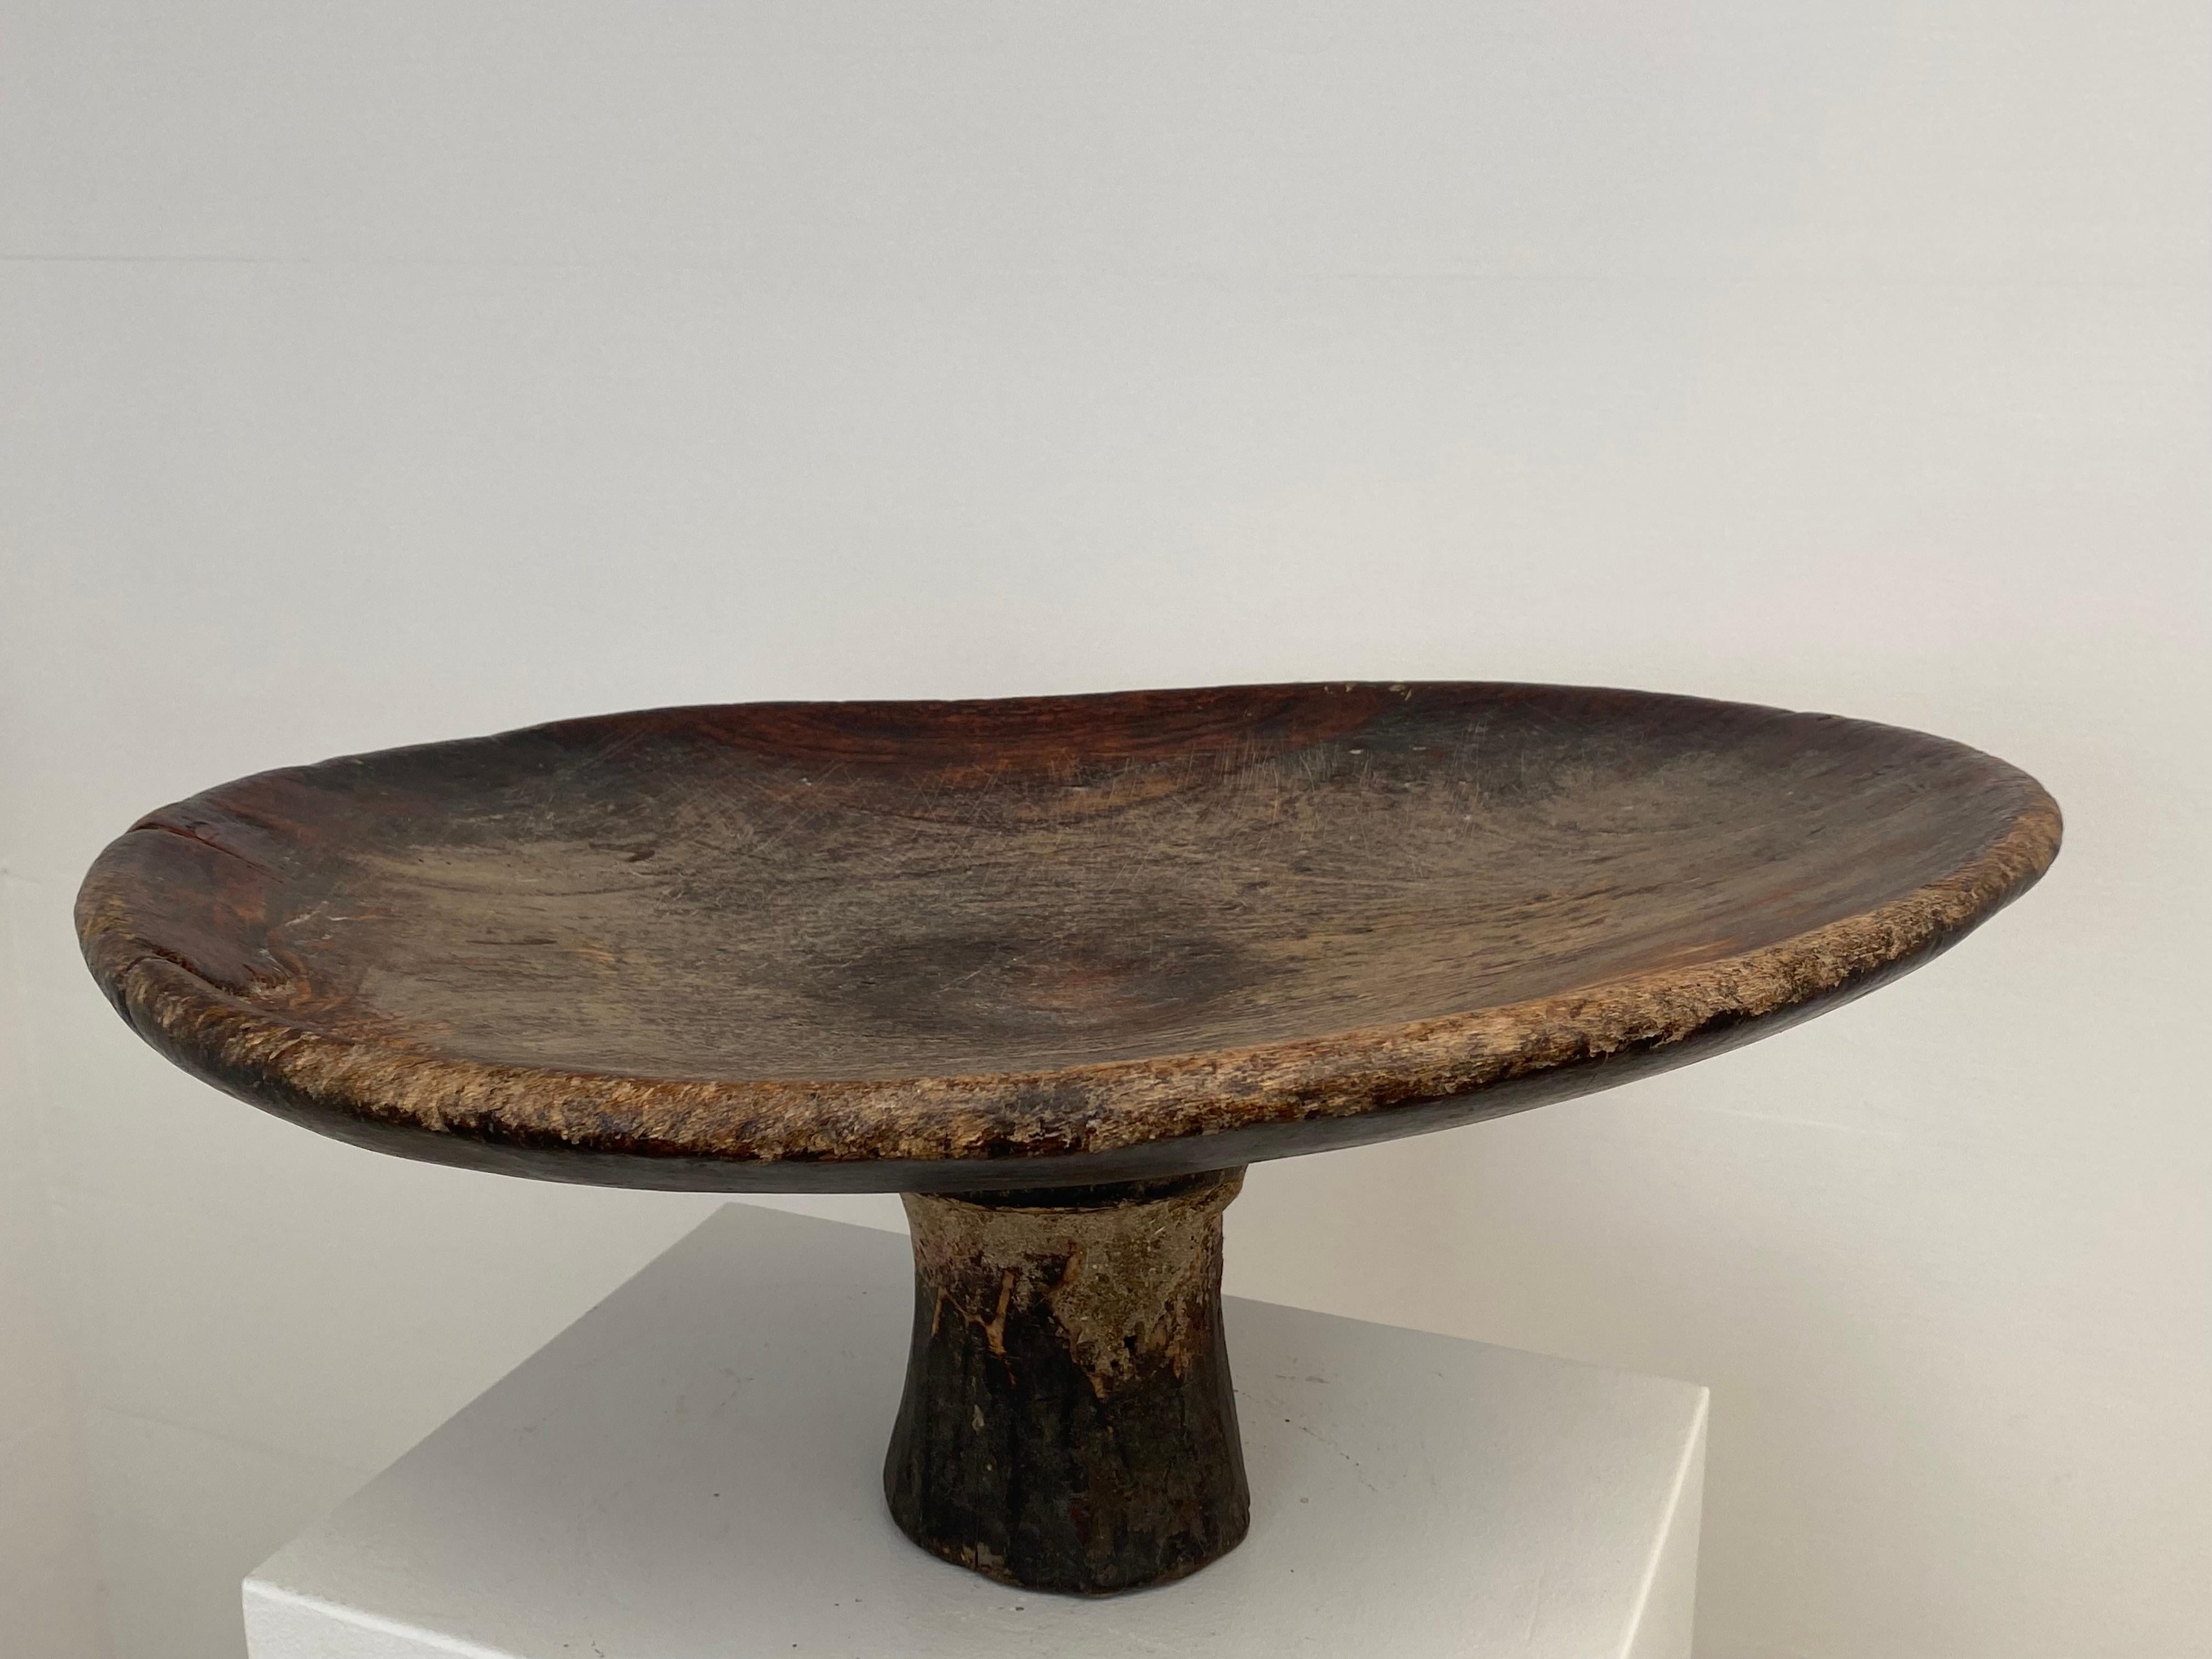 Large and very decorative Berber wooden Tazza on stand,
excellent, antique shine and patina of the wood,
very decorative object to be used for different purposes